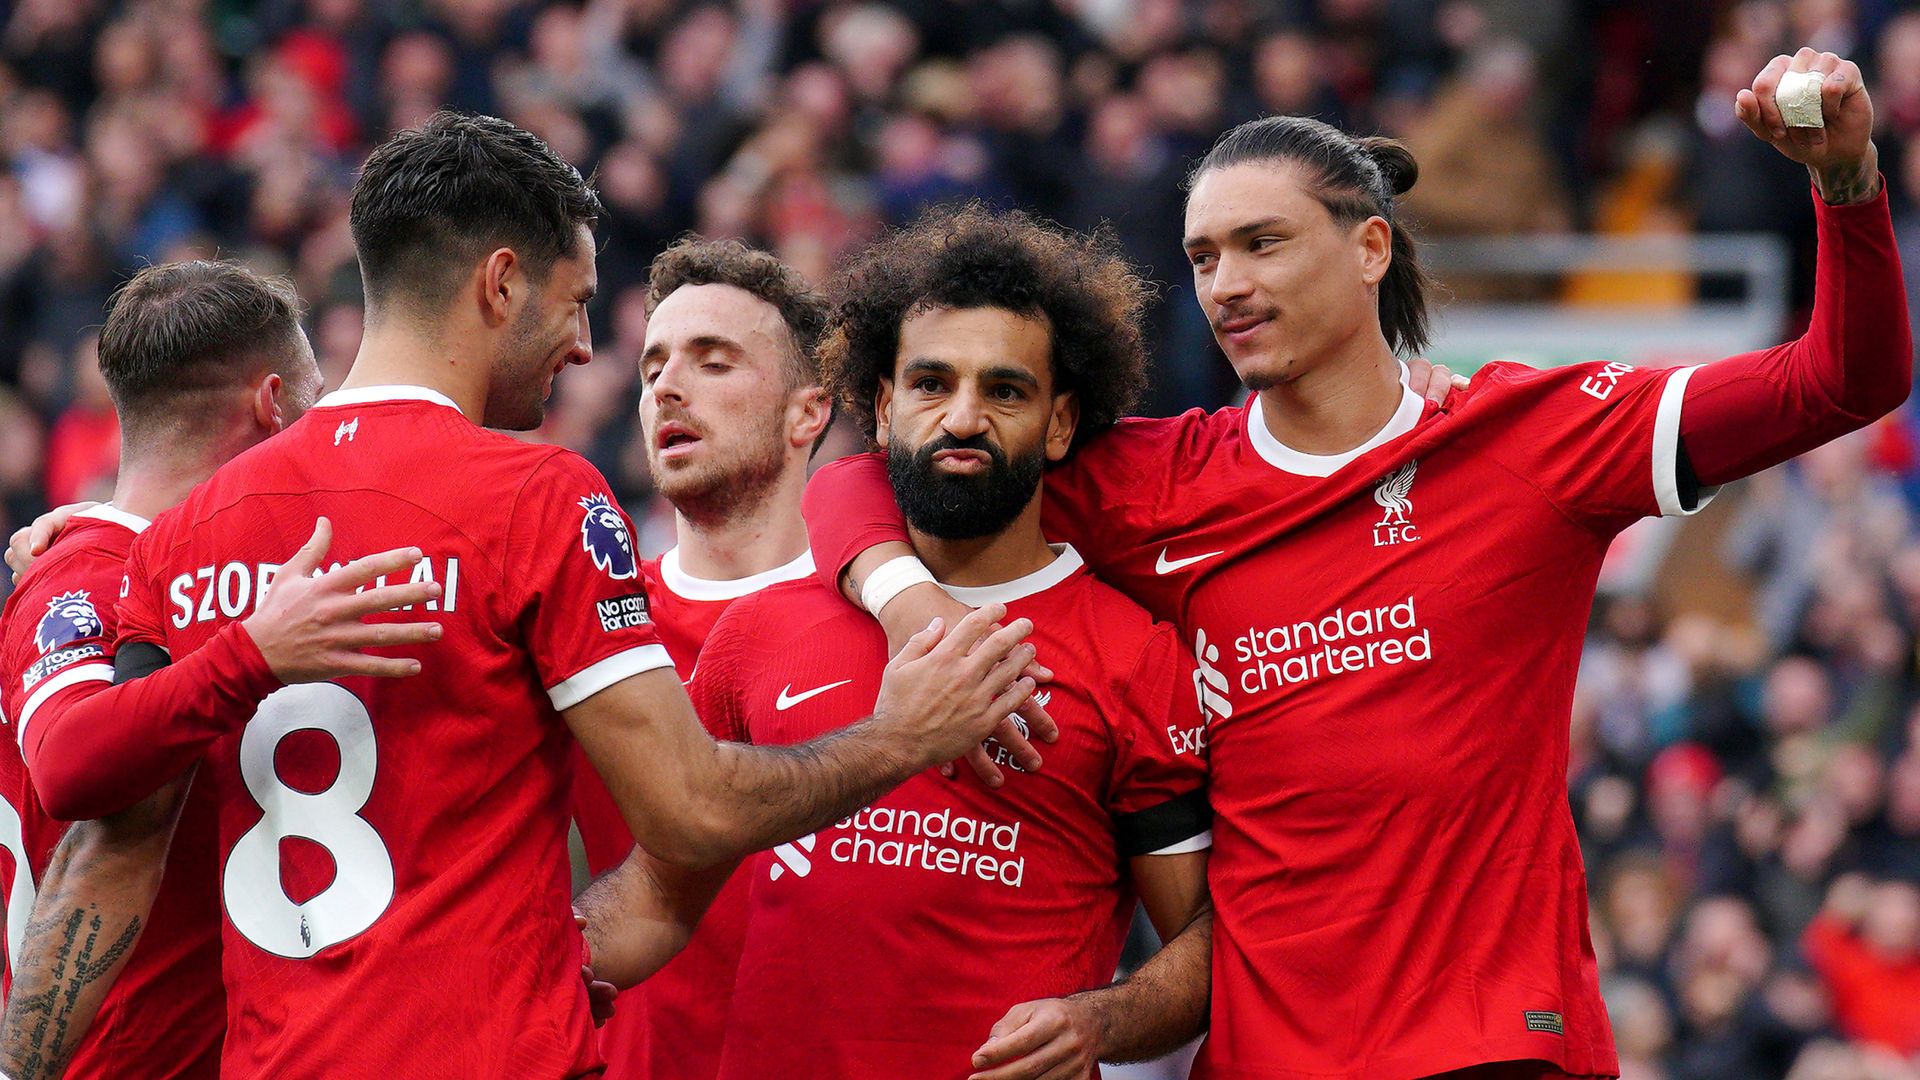 Salah goals send Liverpool top with derby win over Everton